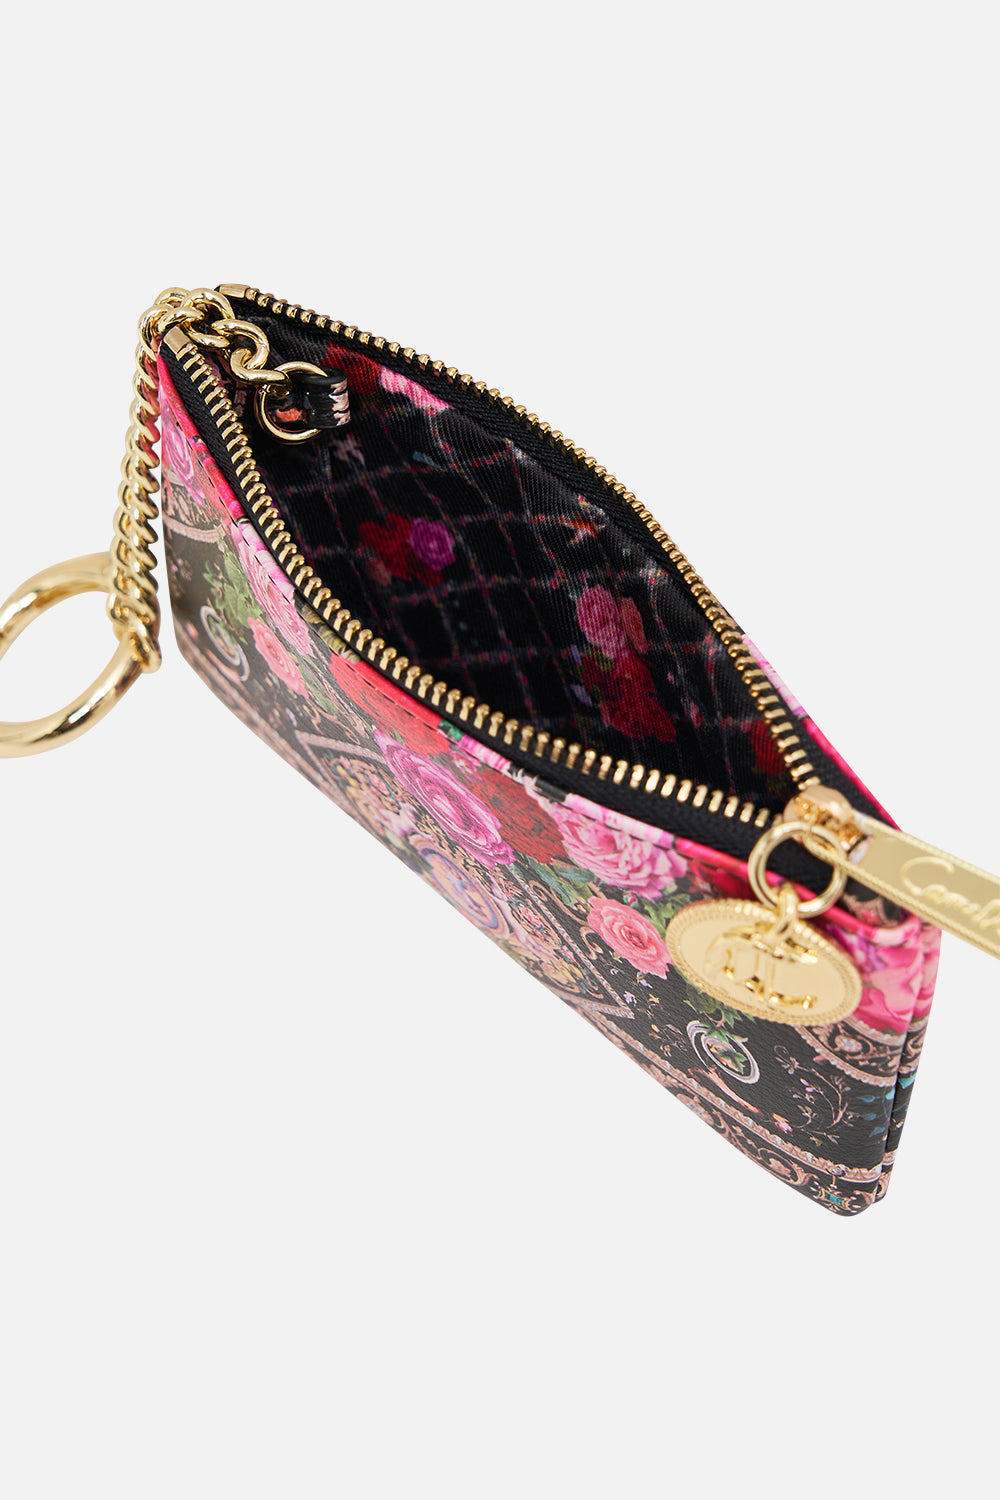 Product view of CAMILLA designer cardholder in Reservation For Love print 